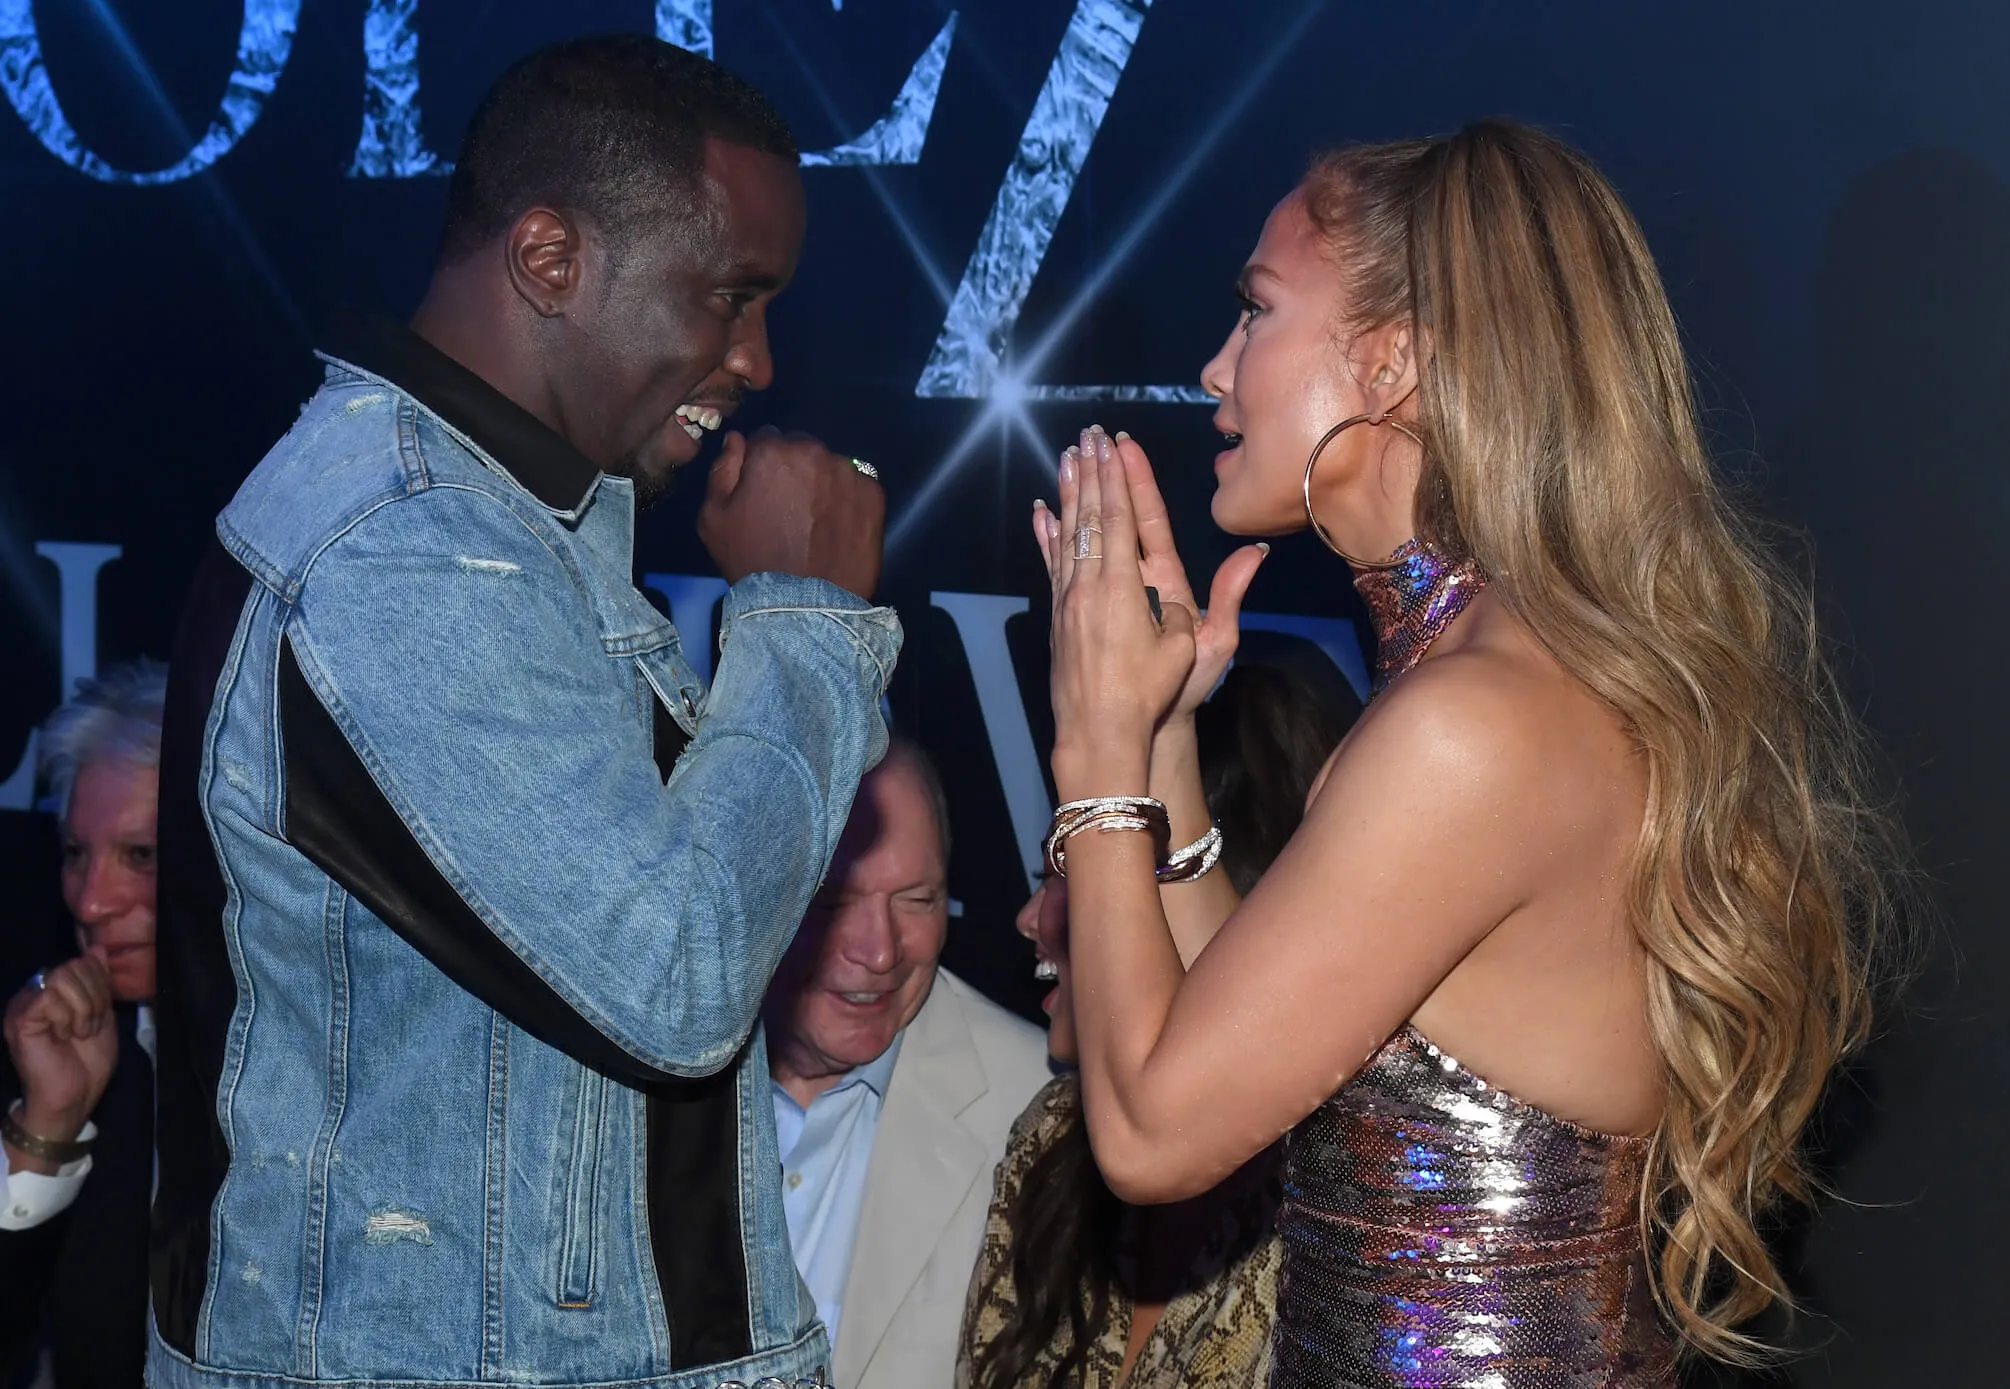 Sean 'P. Diddy' Combs and Jennifer Lopez interacting in 2018 during her residency